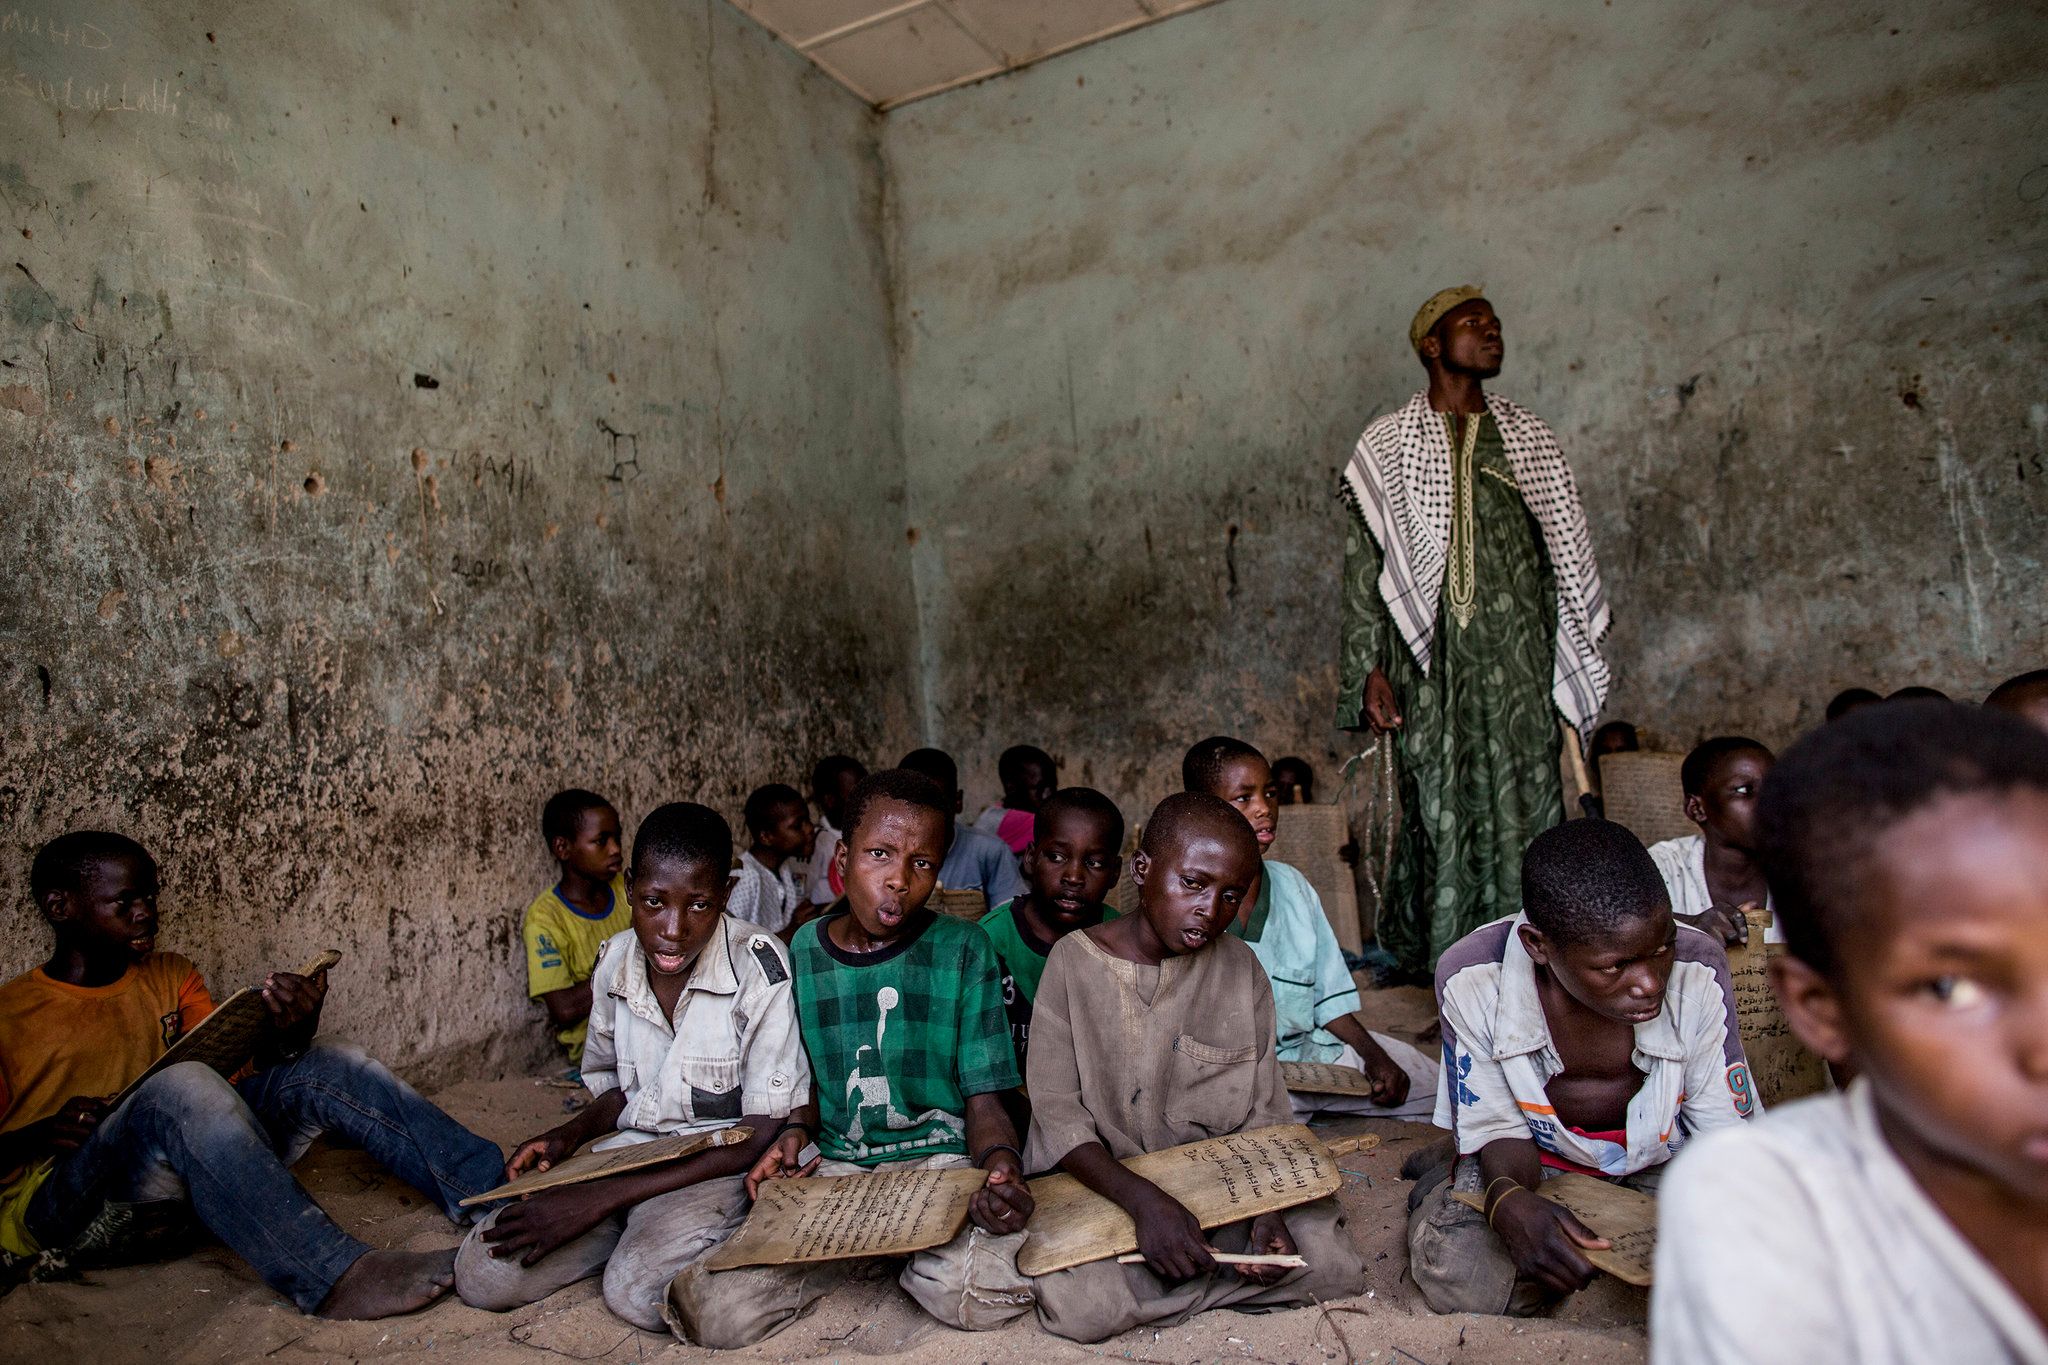 Young boys at an almajiri, a school for poor or orphaned children where they study the Quran and often must beg on the streets to cover their upkeep. Mallam Idris Muhammad, standing, is their teacher. Image by Glenna Gordon. Nigeria, 2017.